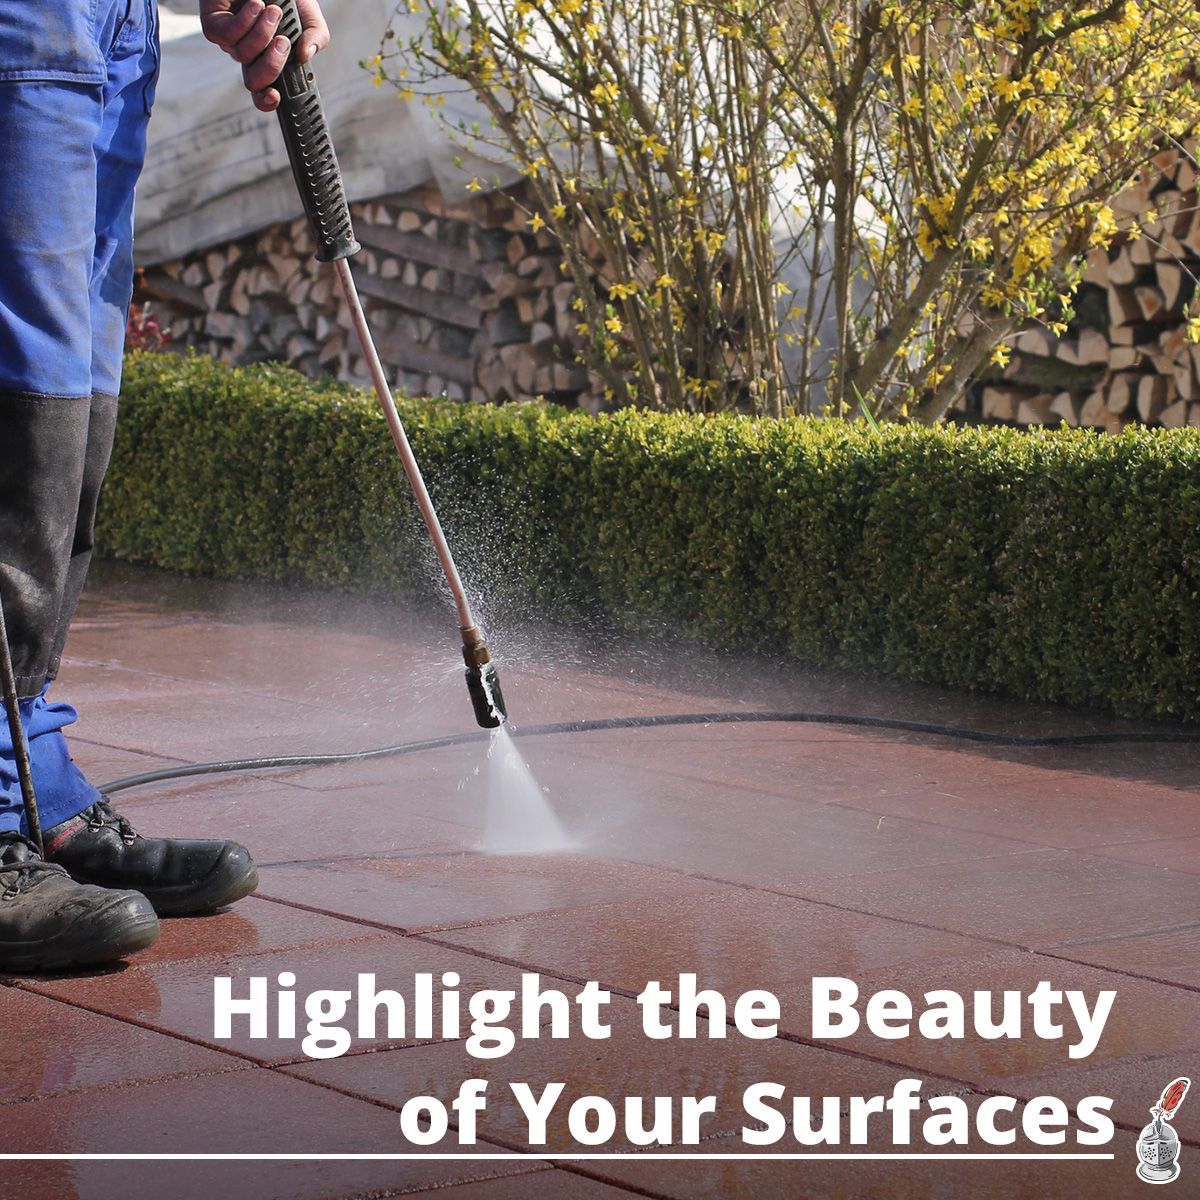 Highlight the Beauty of Your Surfaces